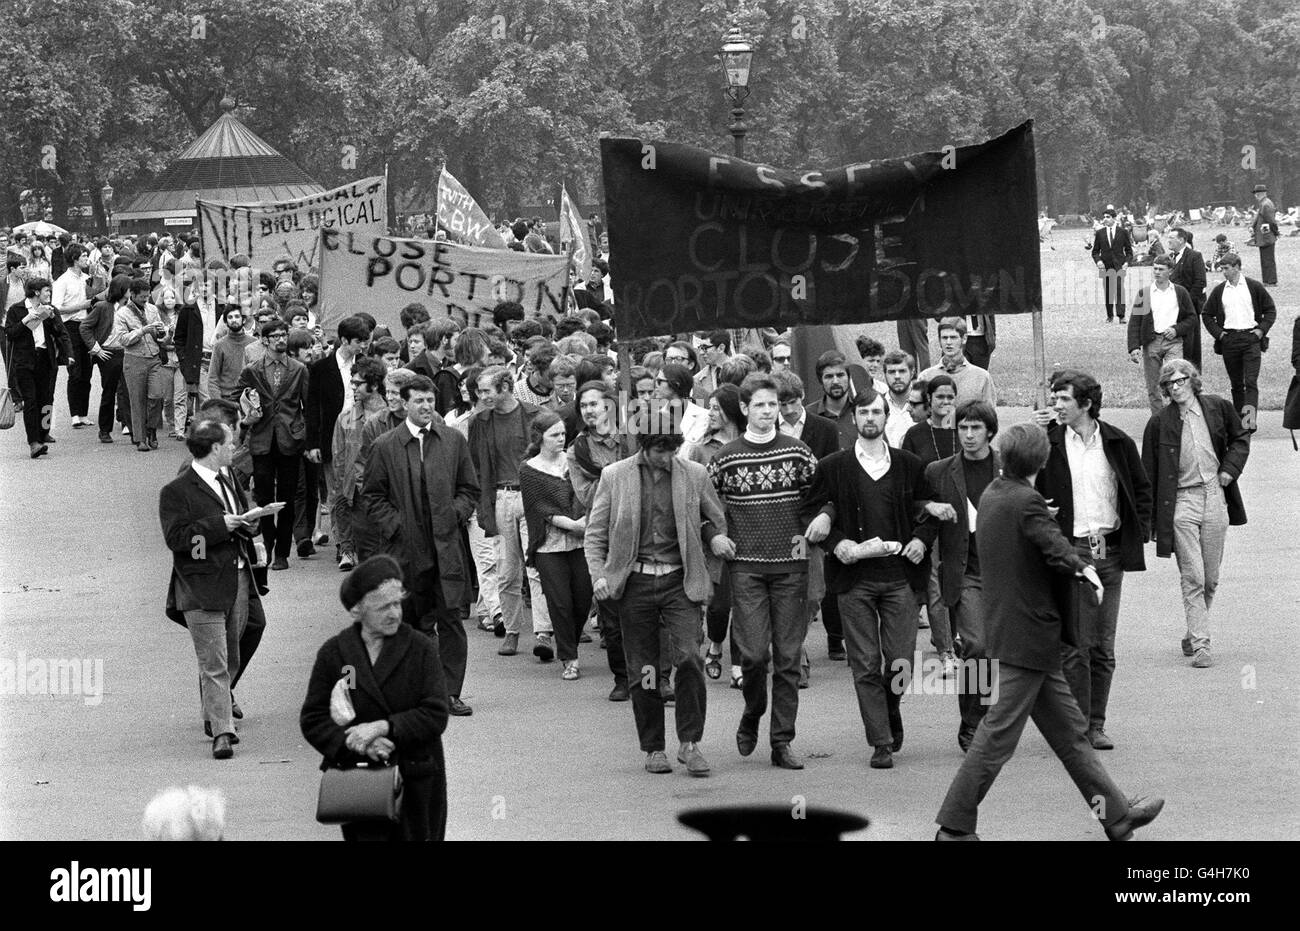 PA NEWS PHOTO 16/6/68  DEMONSTRATION AGAINST GERM CHEMICAL WARFARE, STUDENTS FROM ESSEX UNIVERSITY MARCH FROM HYDE PARK, LONDON TO THE DEFENCE MINISTRY IN WHITEHALL. BANNERS READ CLOSE DOWN PORTON DOWN. Stock Photo